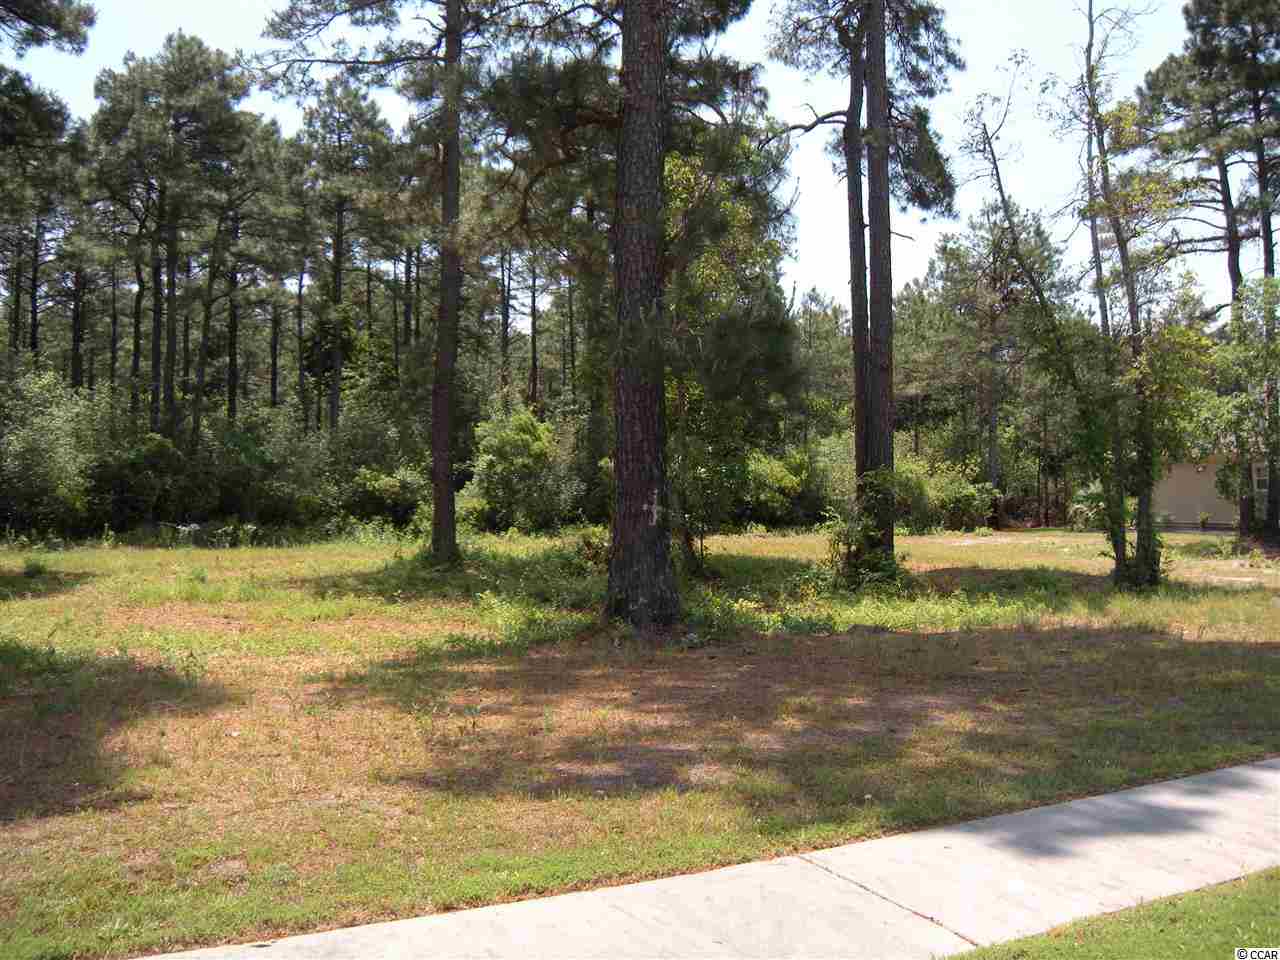 Lot 700 Welcome Dr. Myrtle Beach, SC 29579